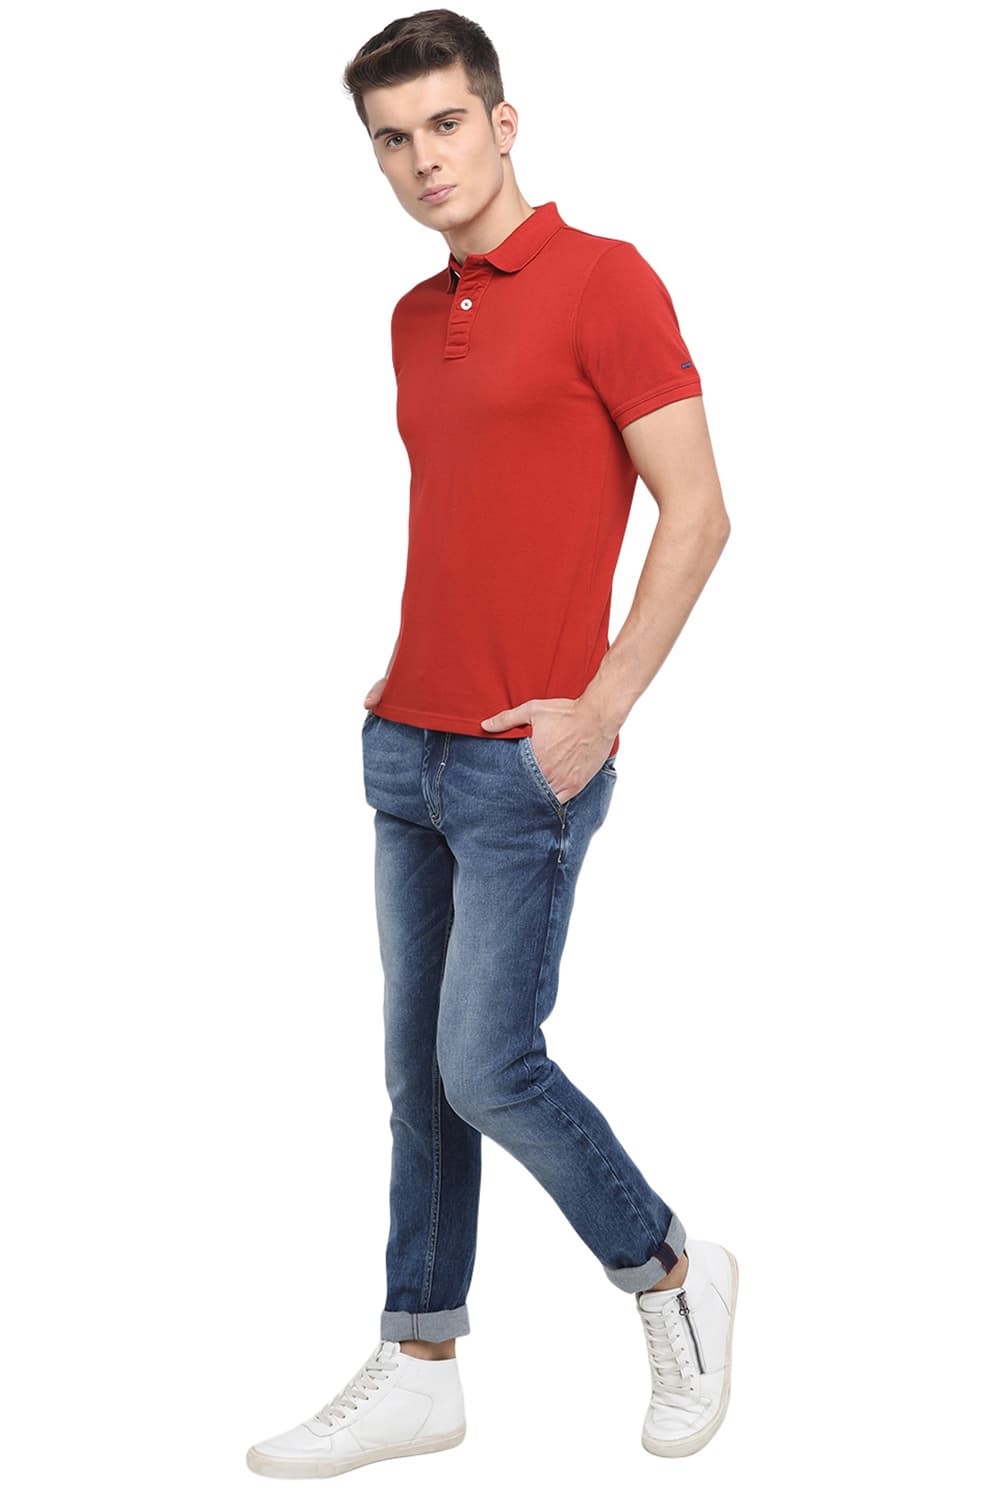 BASICS MUSCLE FIT POLO T SHIRT